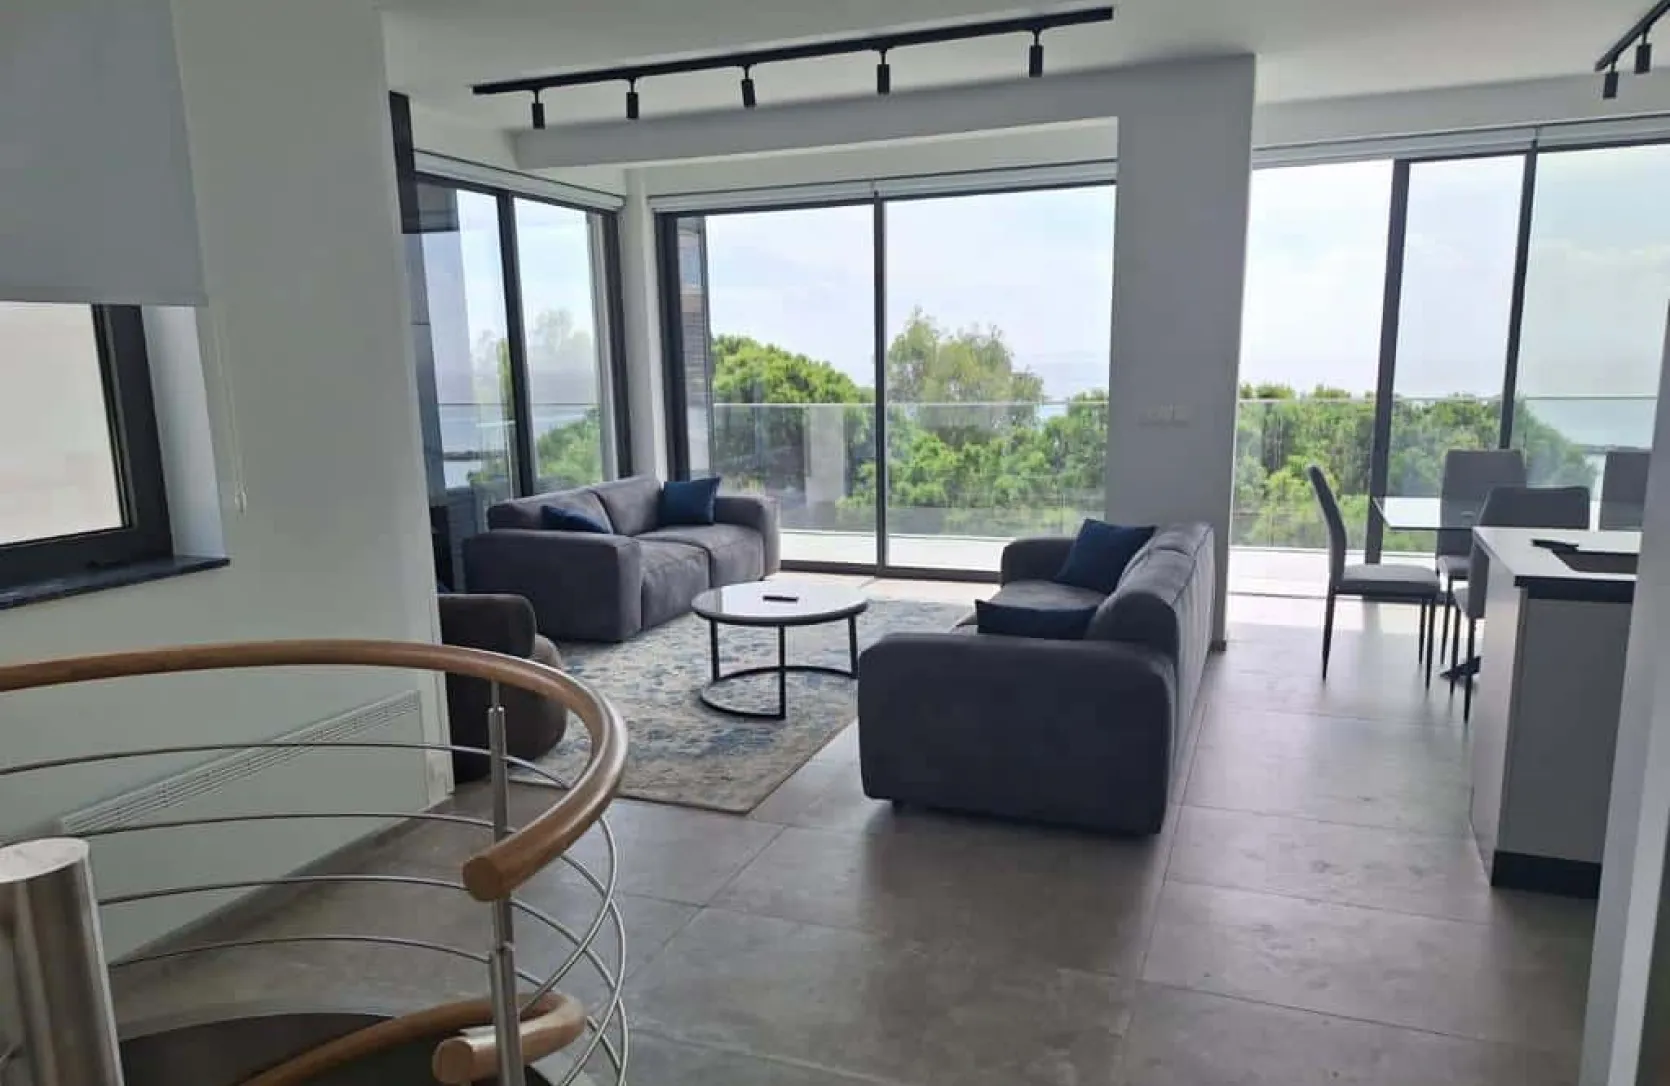 2 bedroom penthouse for rent - 15042